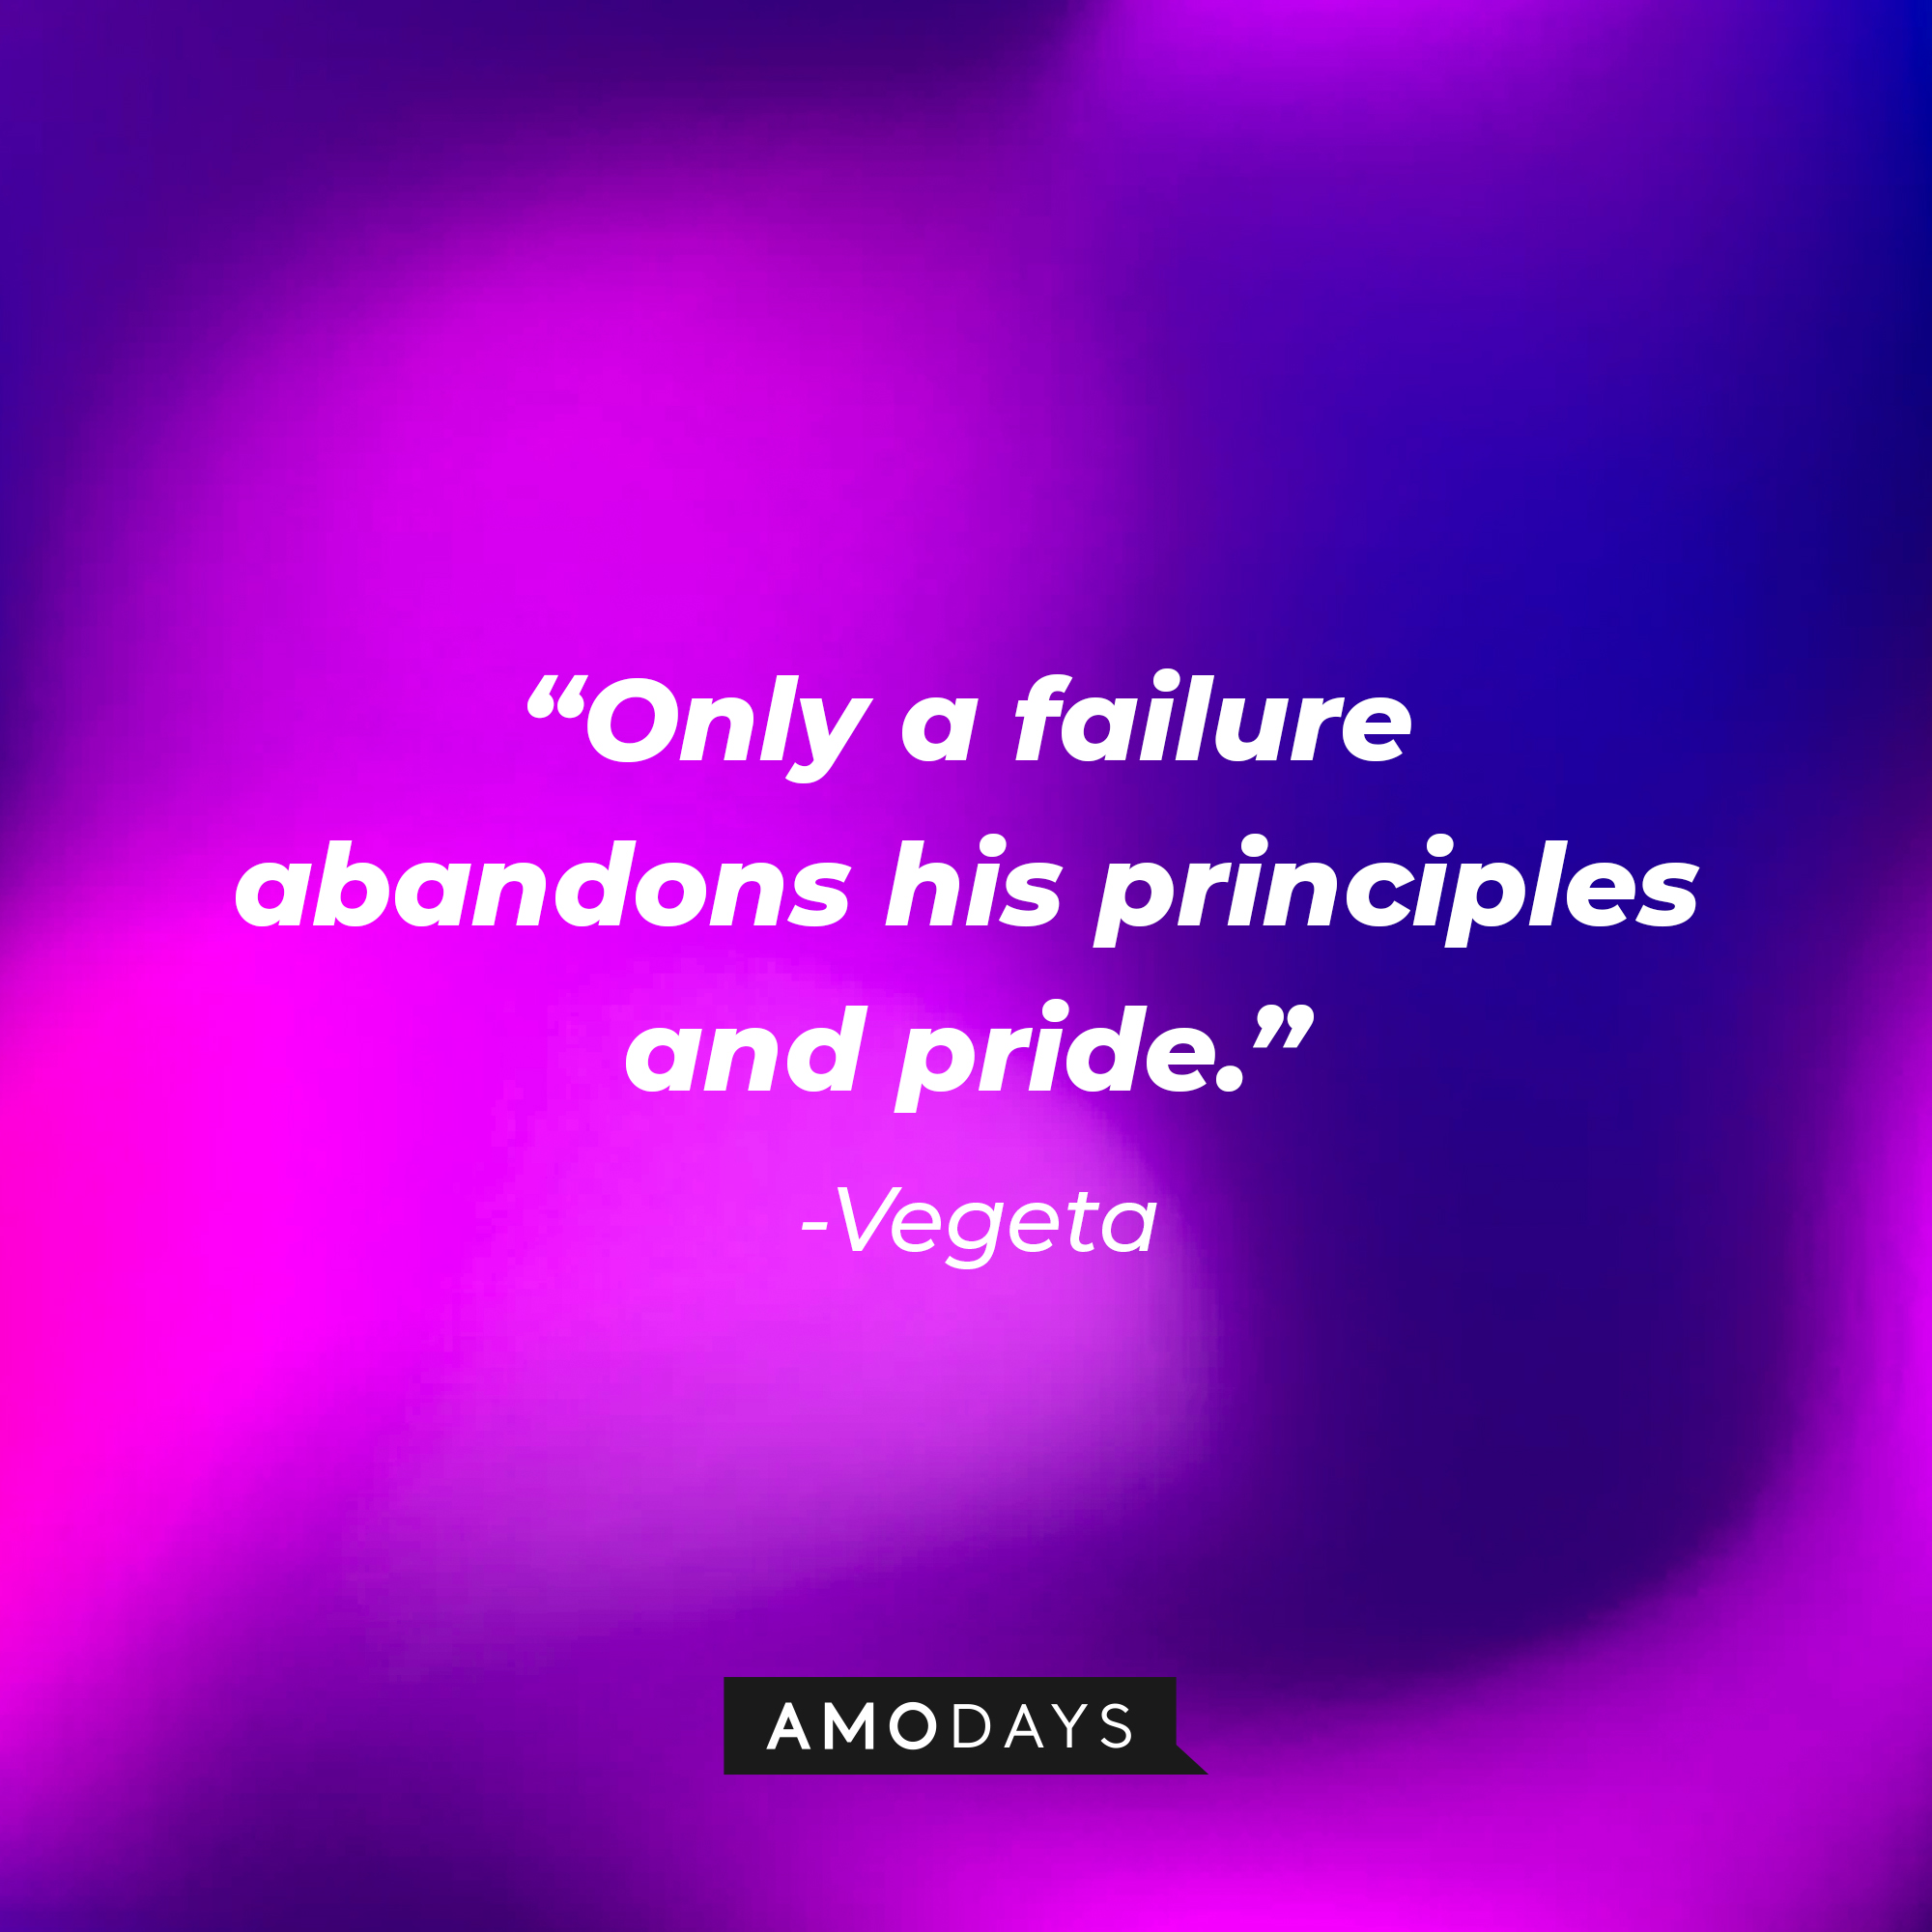 Vegeta’s quote: "Only a failure abandons his principles and pride." | Source: AmoDays